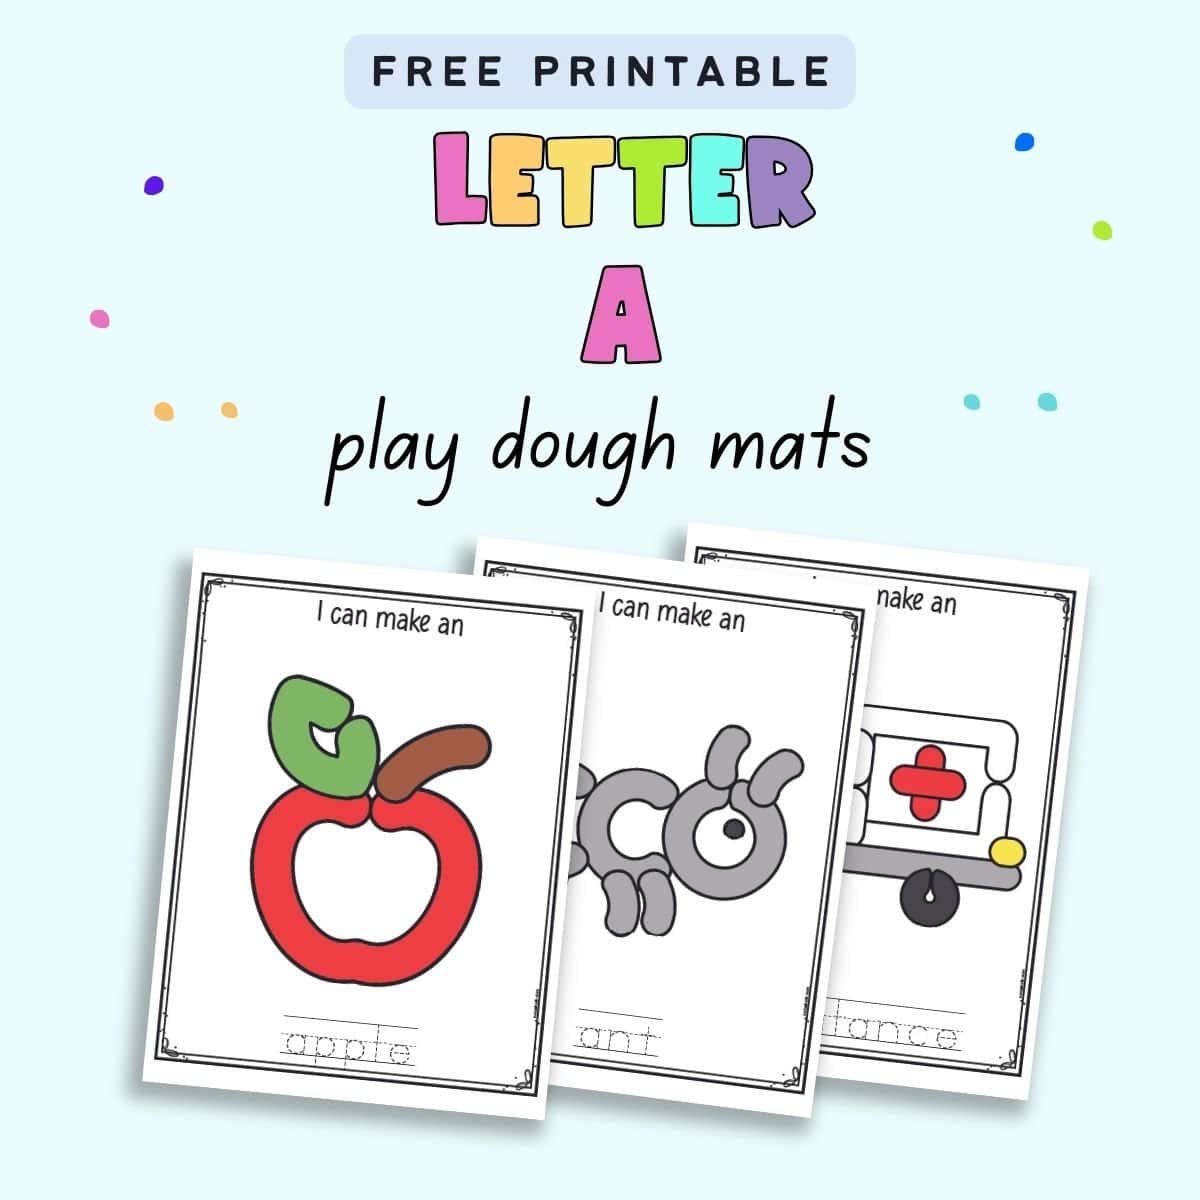 Text "free printable letter a play dough mats" with a. preview of three mats. One shows an apple, another an ant, and the third an ambulance 